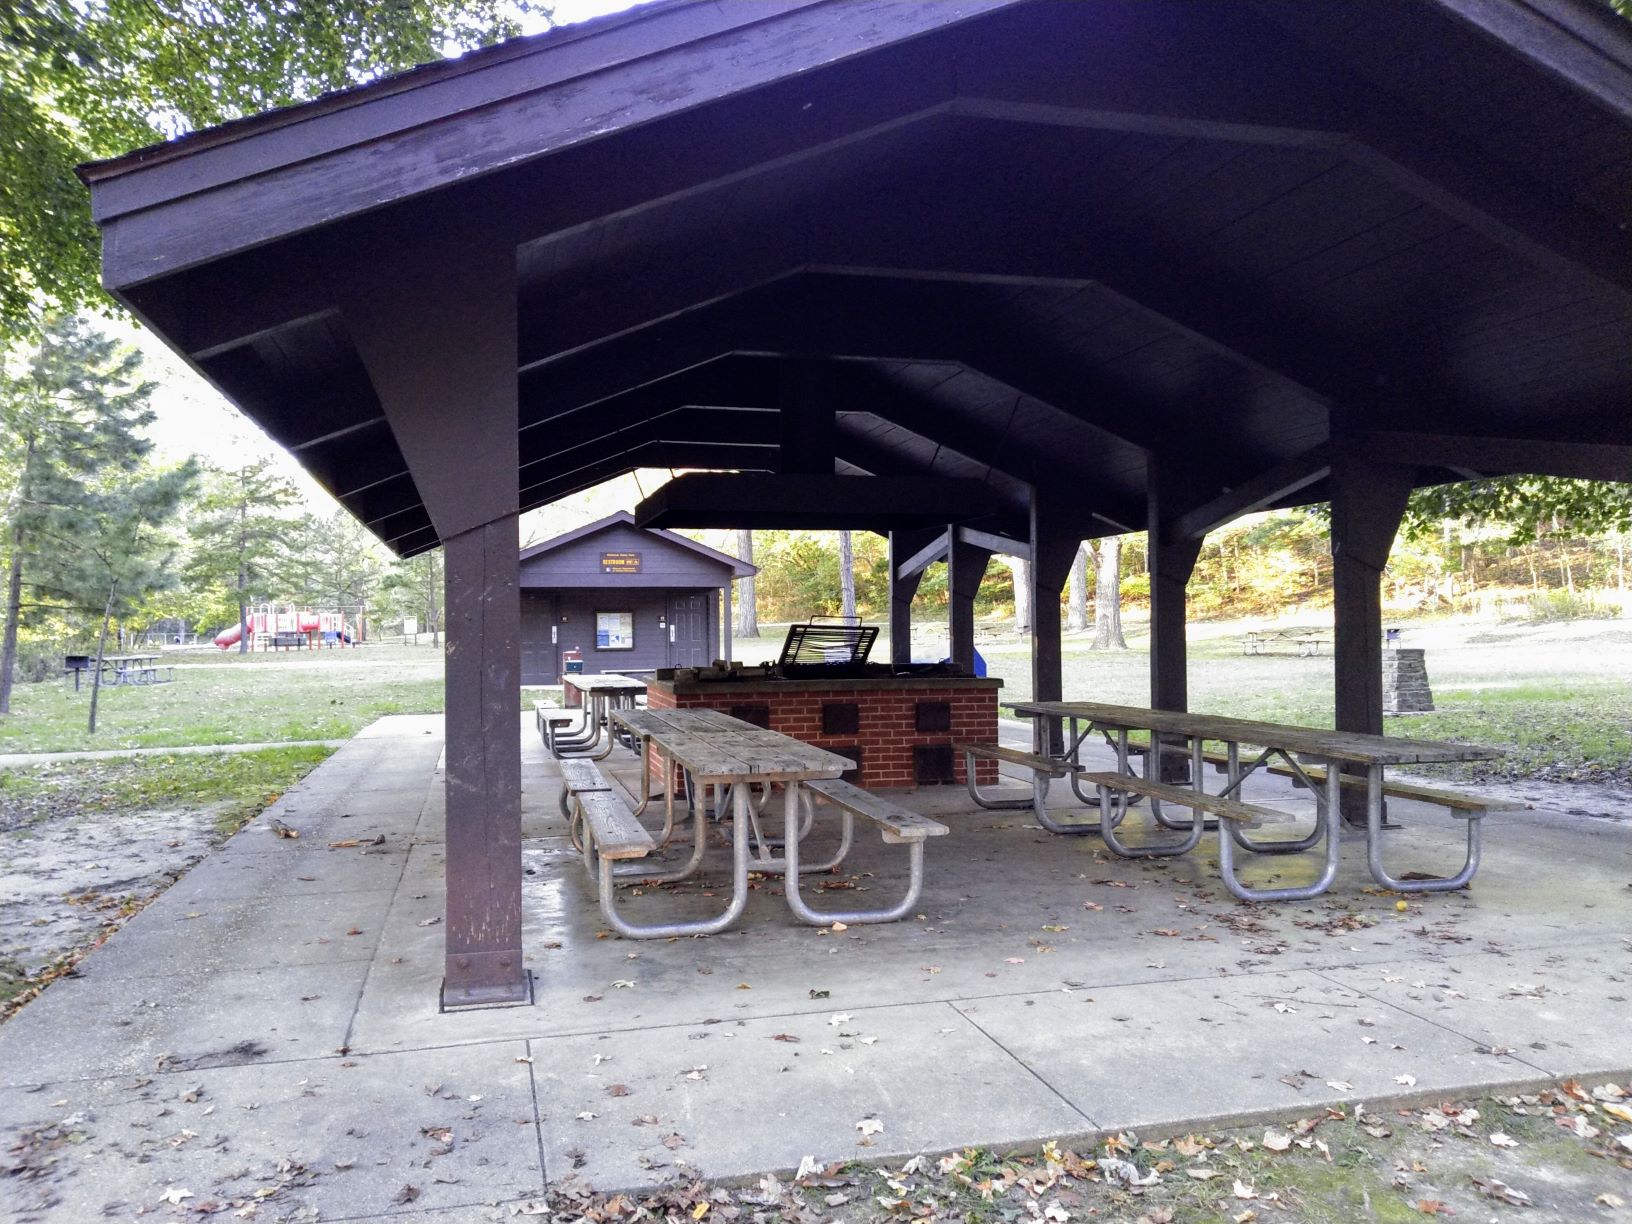 Open picnic shelter with restrooms and playground in background